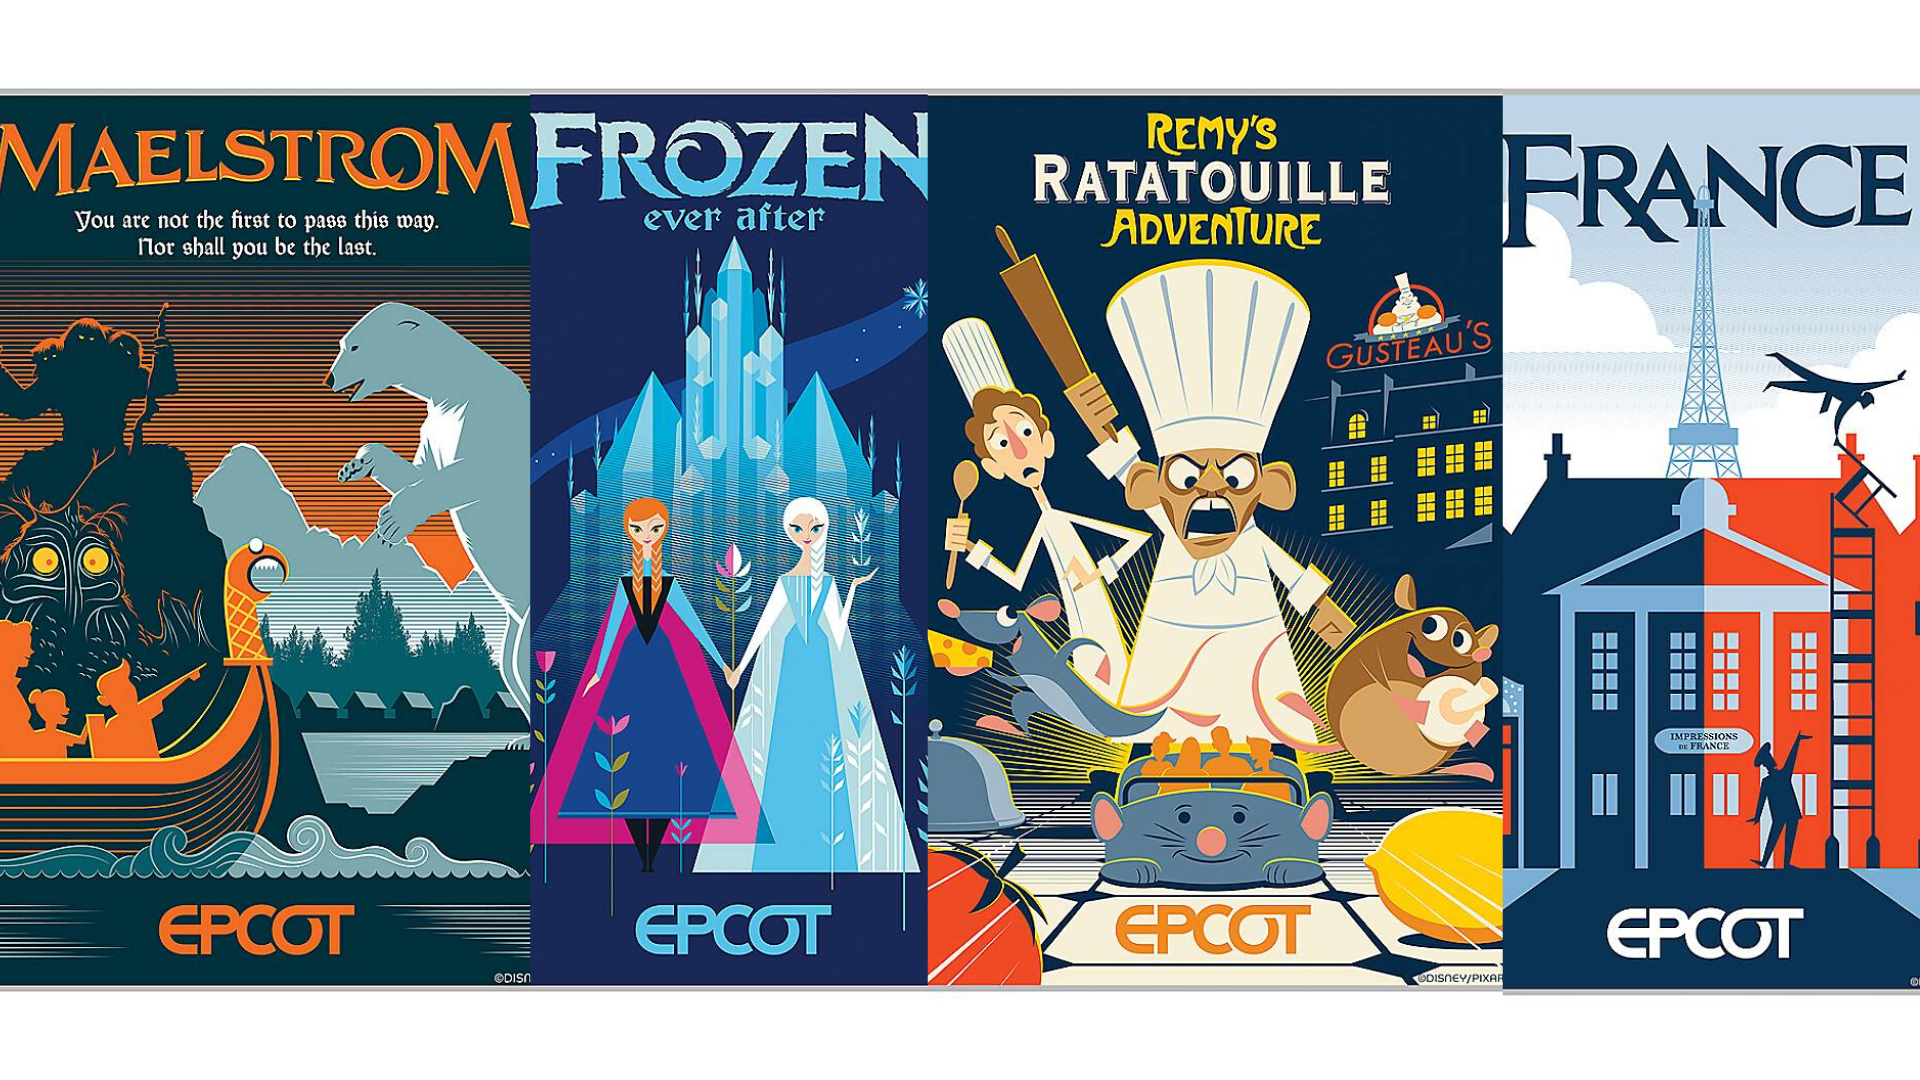 epcot posters france norway